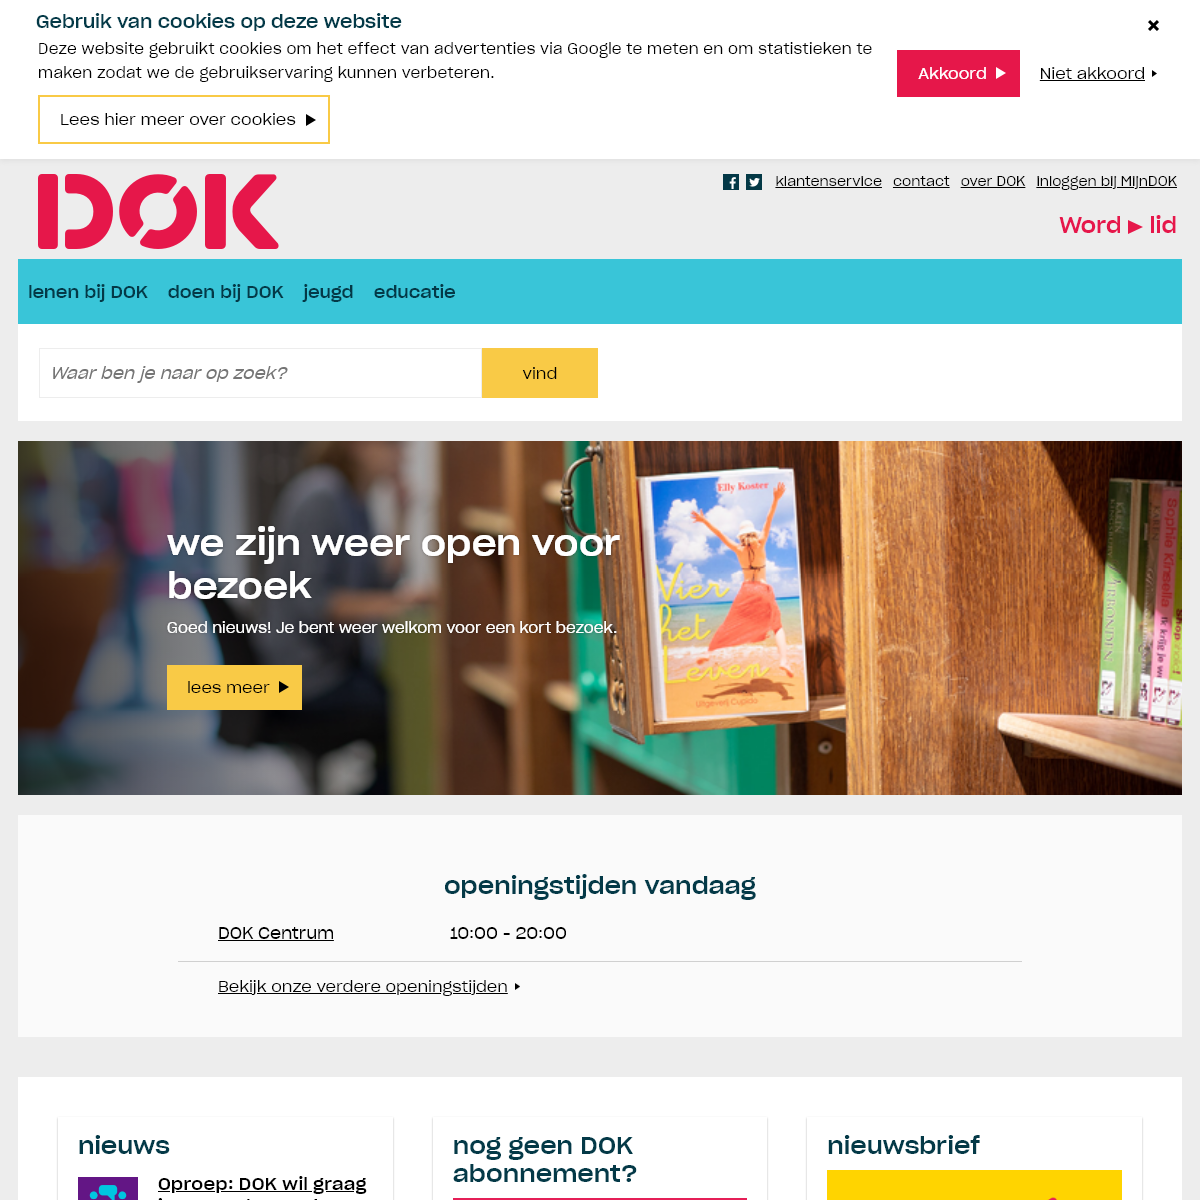 A complete backup of dok.info